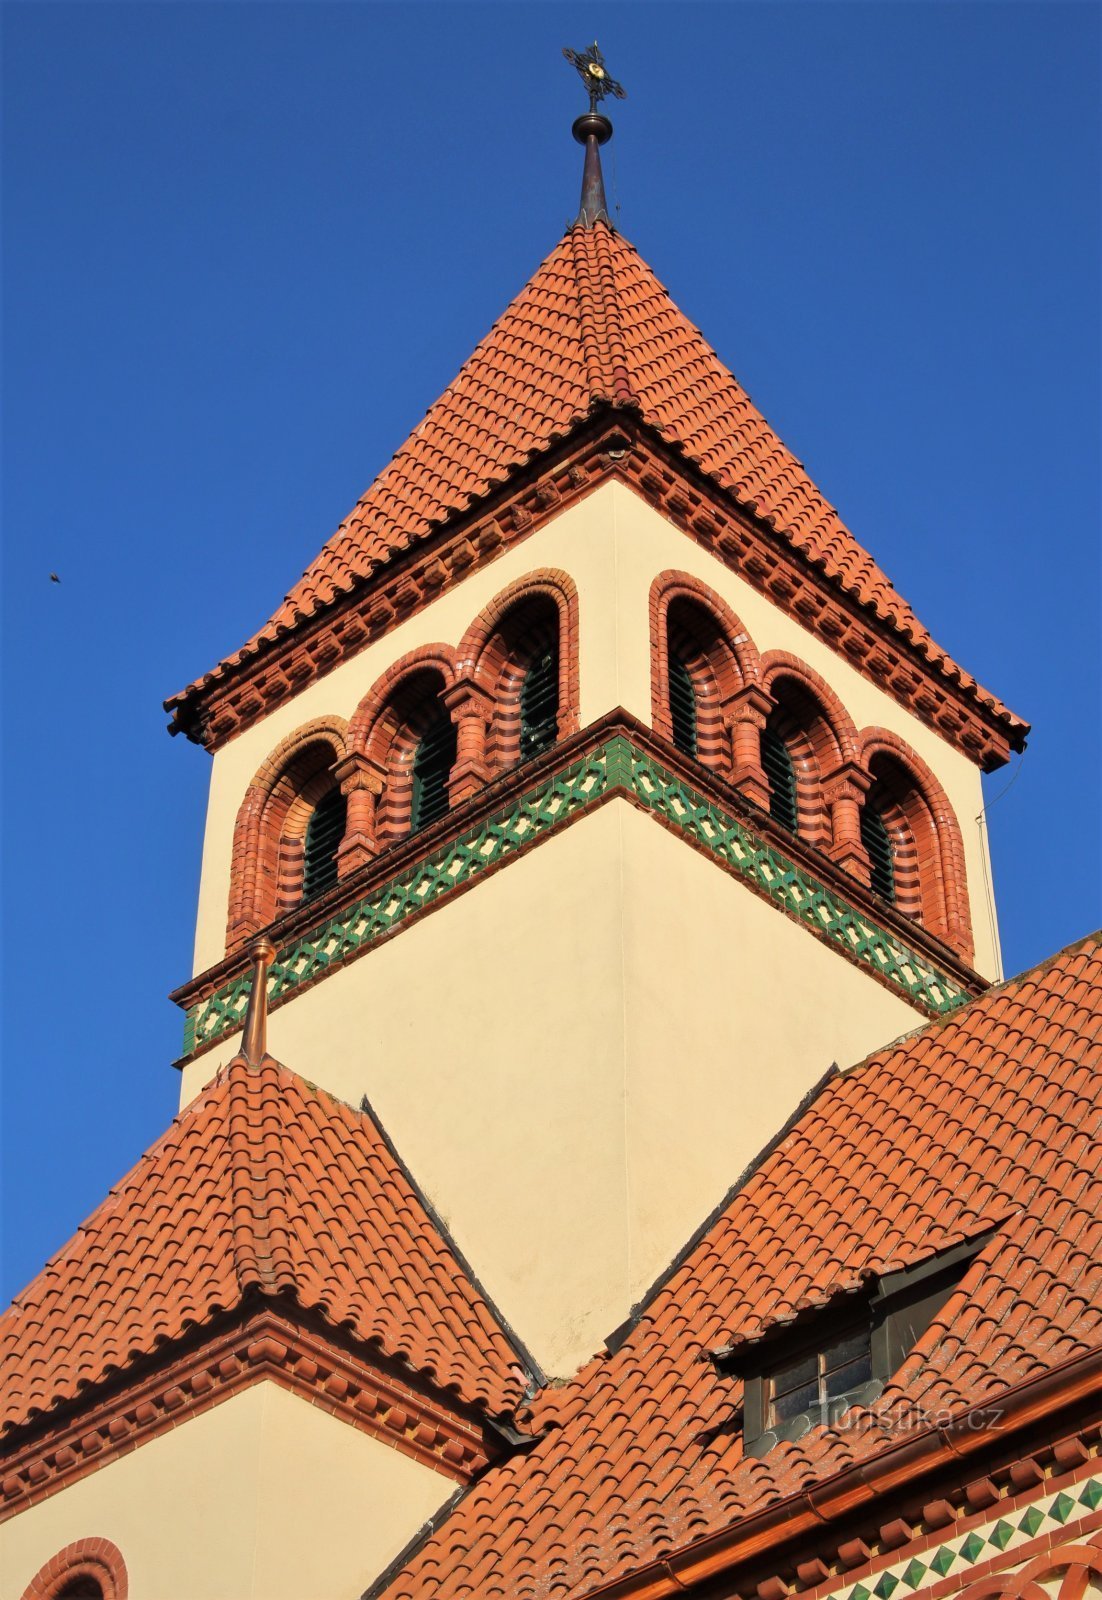 Detail of the church tower